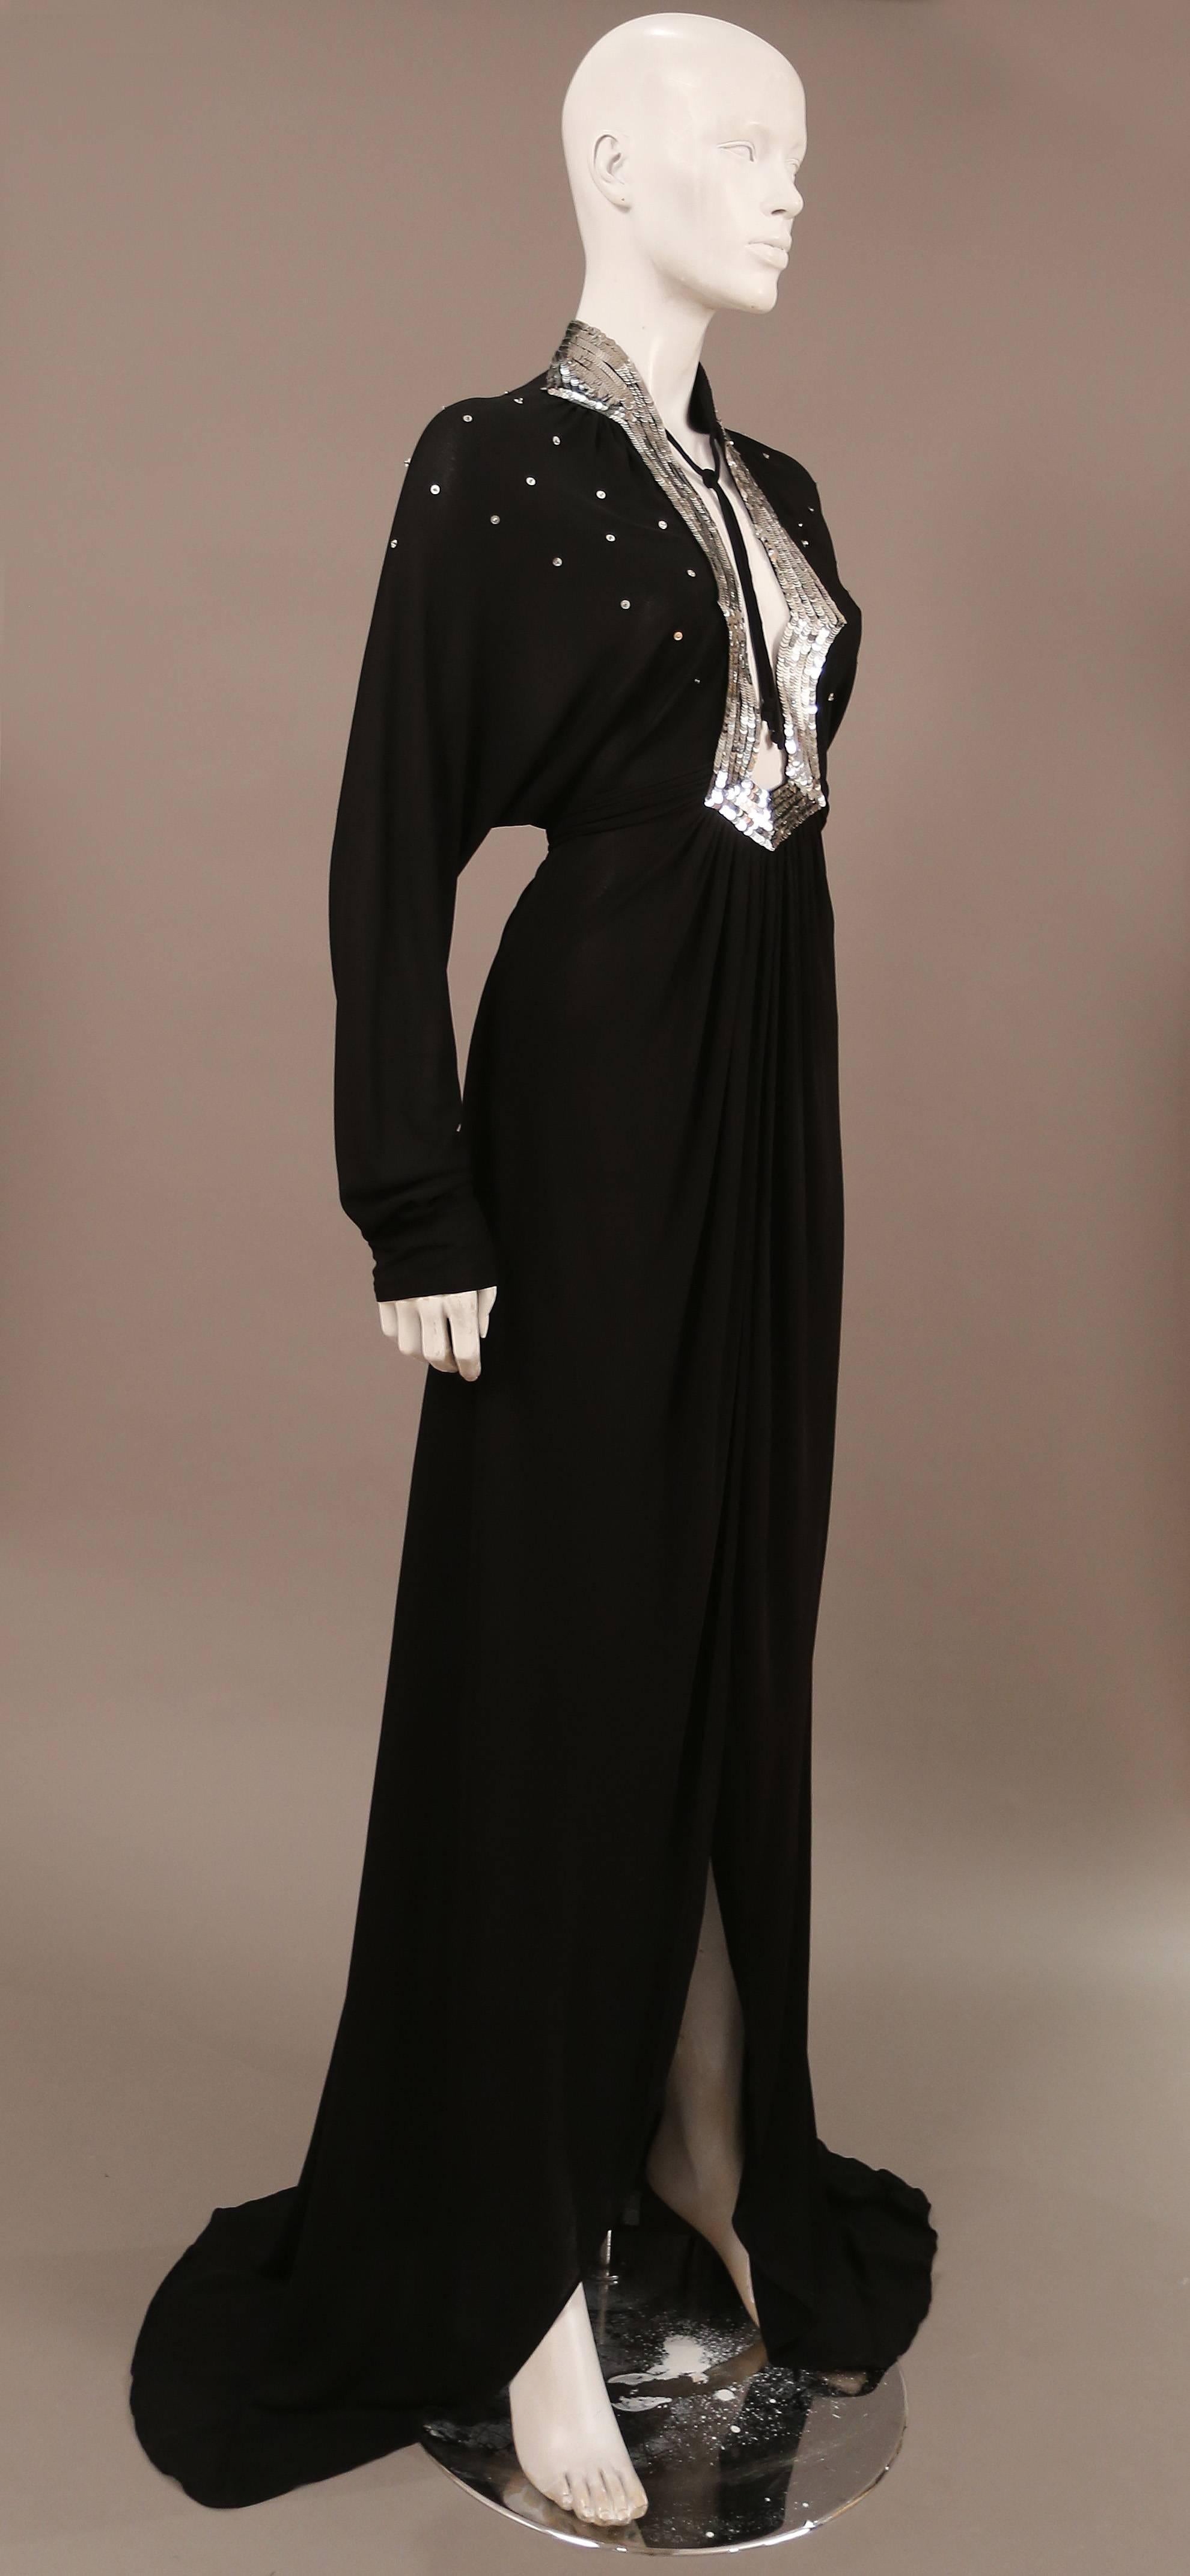 Rare Ossie Clark black jersey evening wrap dress, circa 1978. The dress features sequinned yoke, draped sleeves, low plunge, super high slit and long train at rear. 

Size: uk 10 eu 38
Shoulder to shoulder - 17